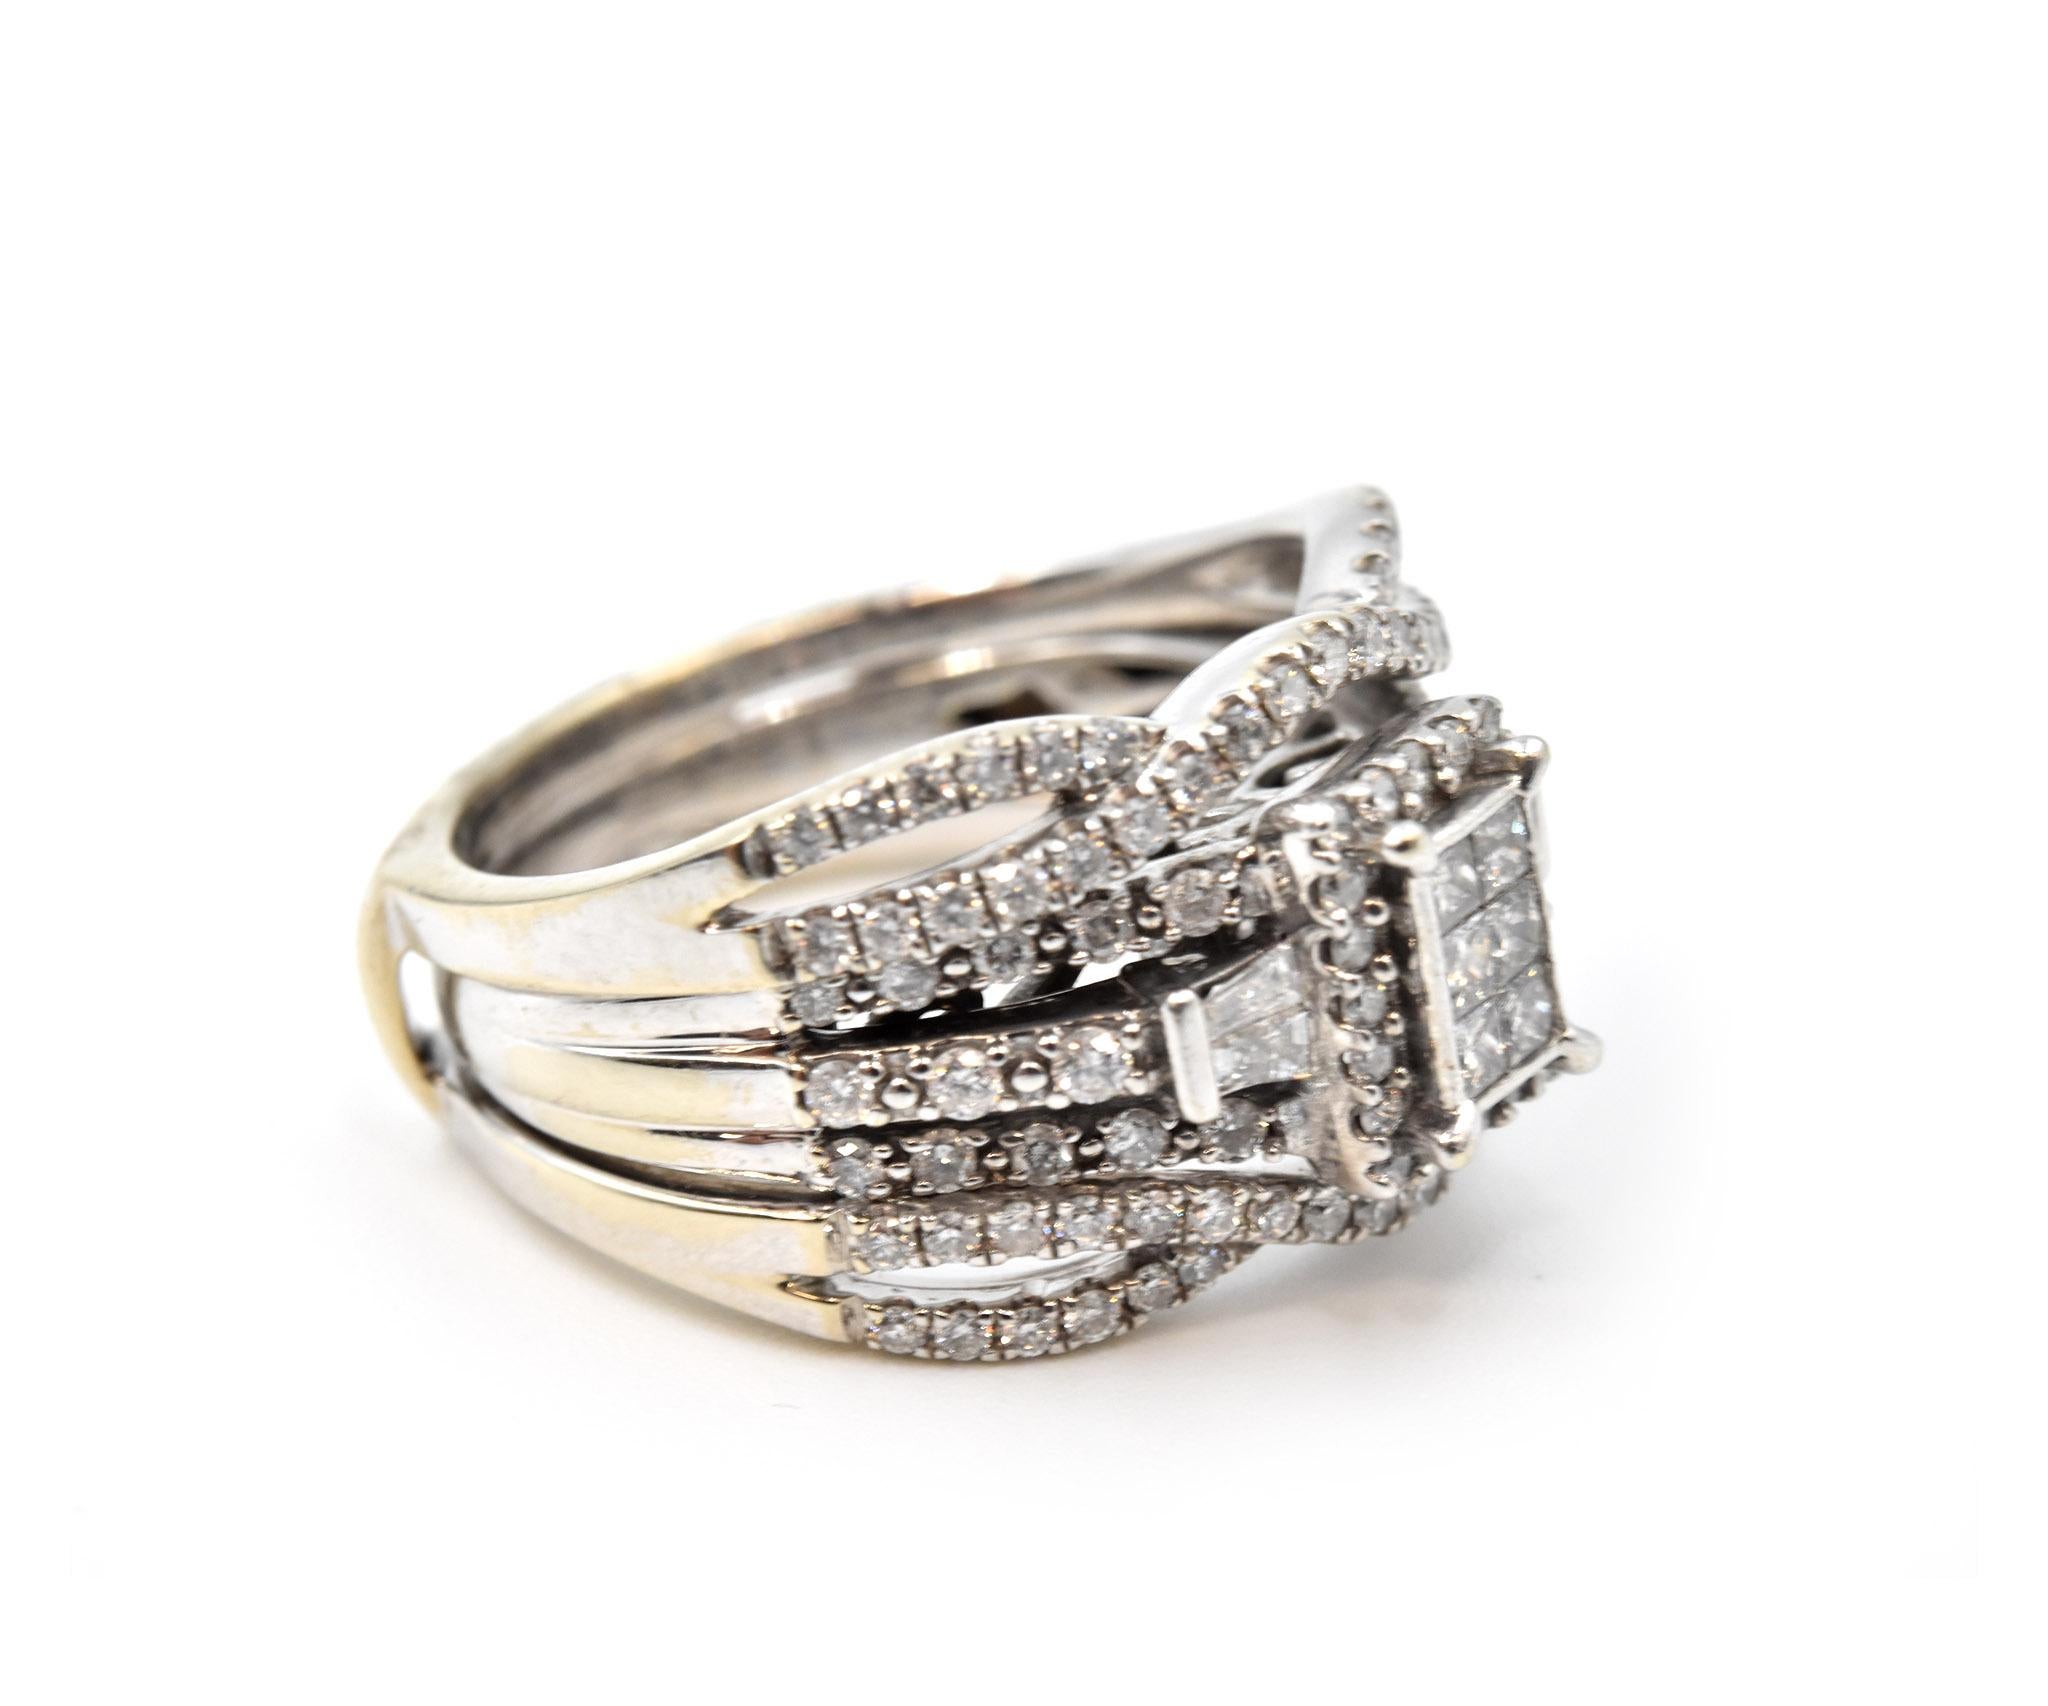 Designer: custom design
Material: 14k white gold
Diamonds: 116 round and princess cut = 0.74 carat weight
Color: I
Clarity: SI1
Ring Size: 5 1/2 (please allow two additional shipping days for sizing requests)
Weight: 7.93 grams
